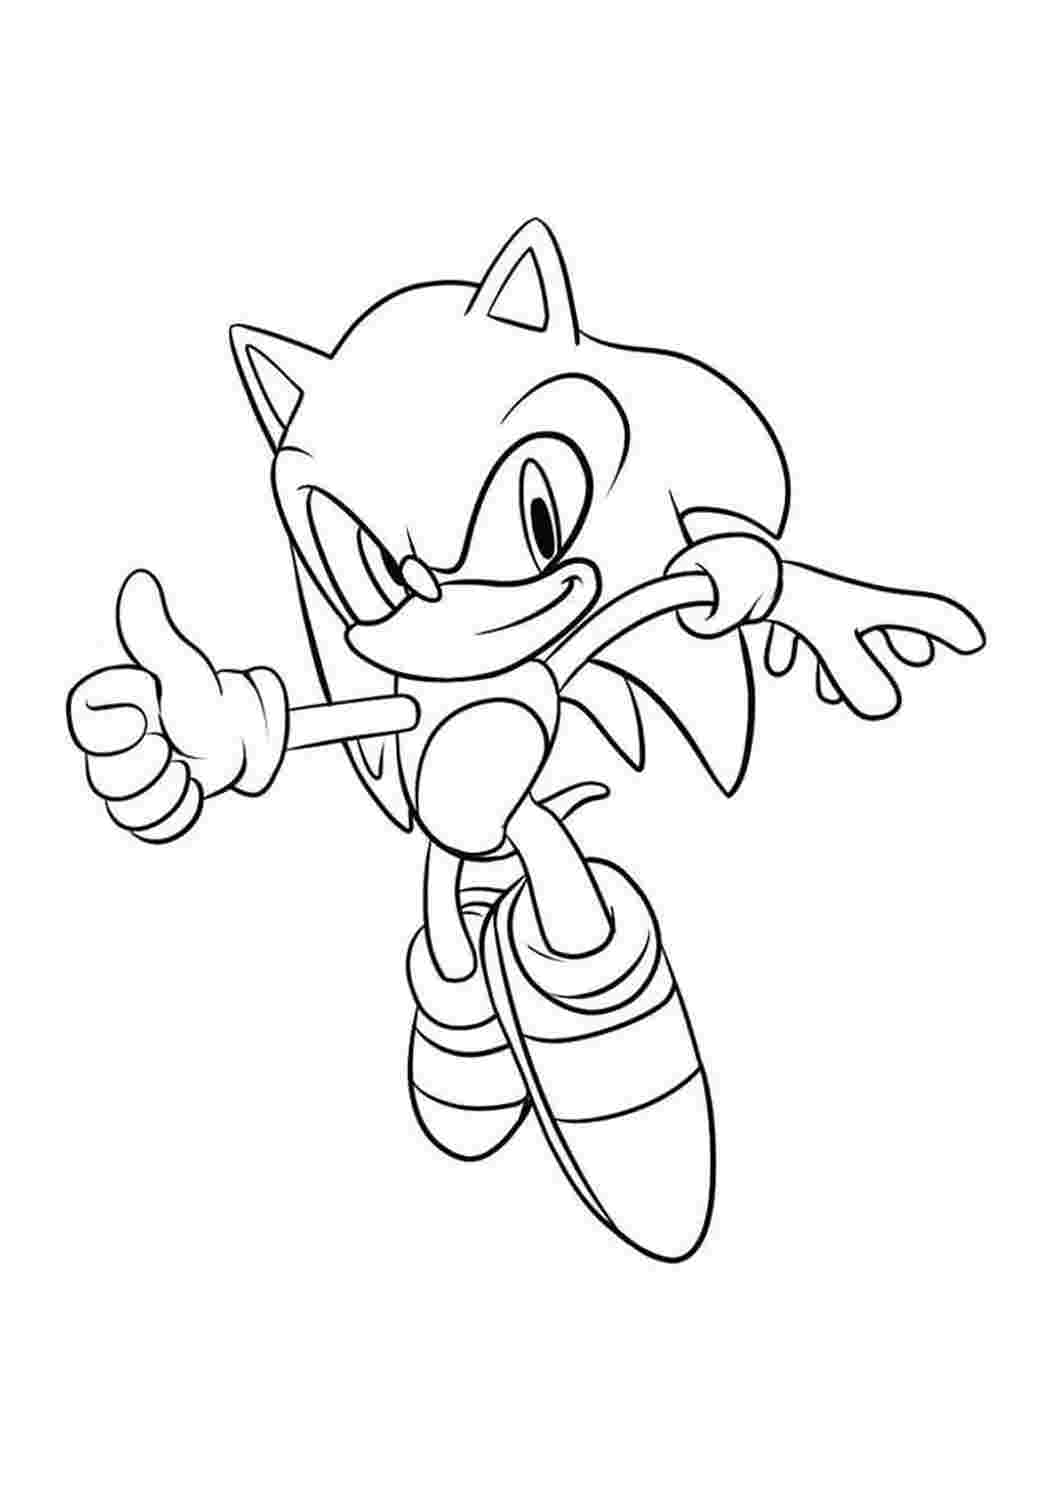 Sonic Coloring Page  Раскраски, Бесплатные раскраски, Раскраски